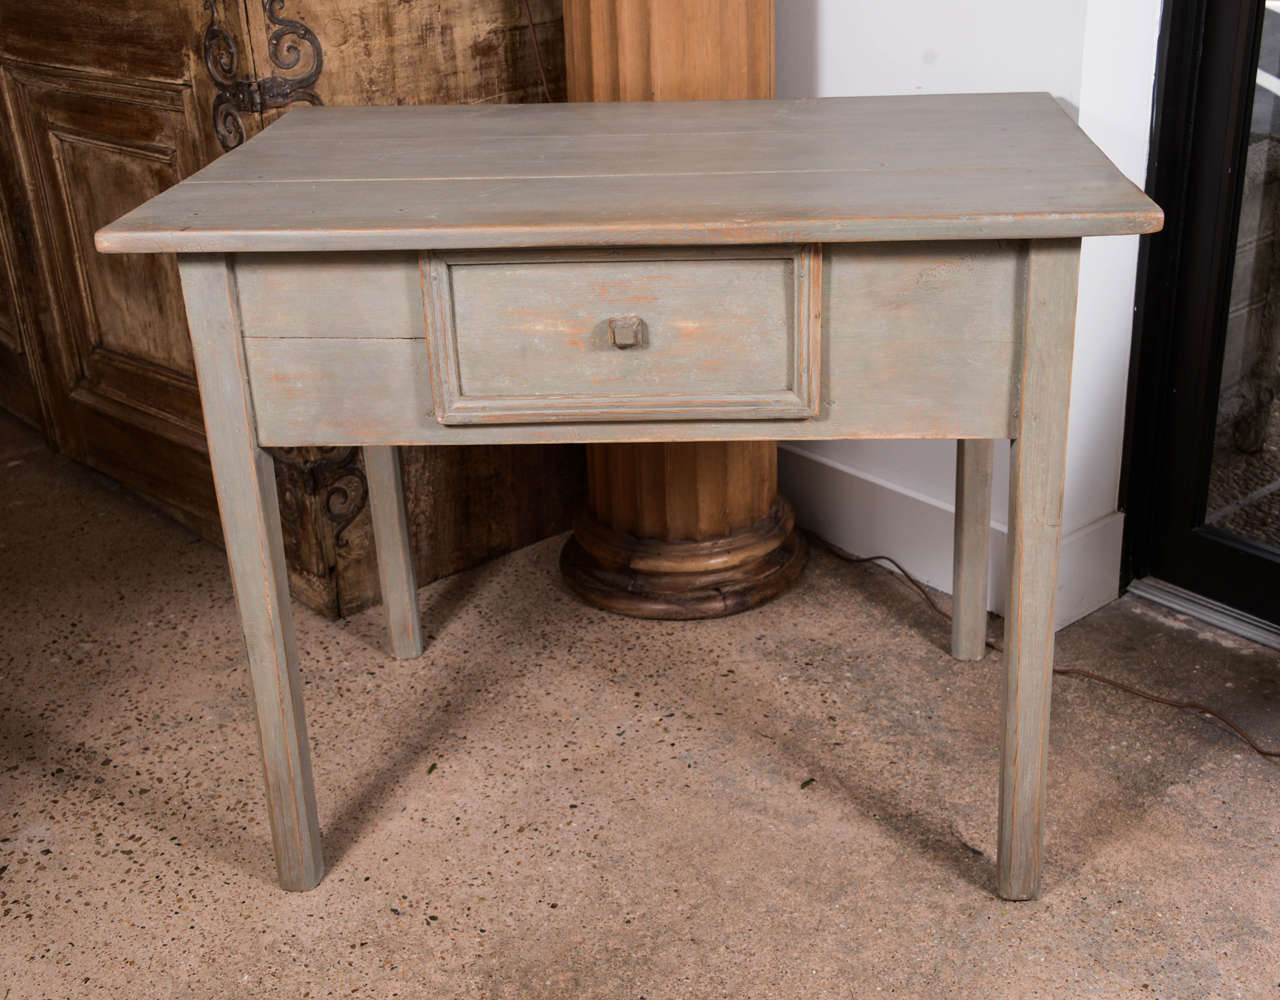 Early 19th century Spanish table with one drawer, tapered legs and later paint.